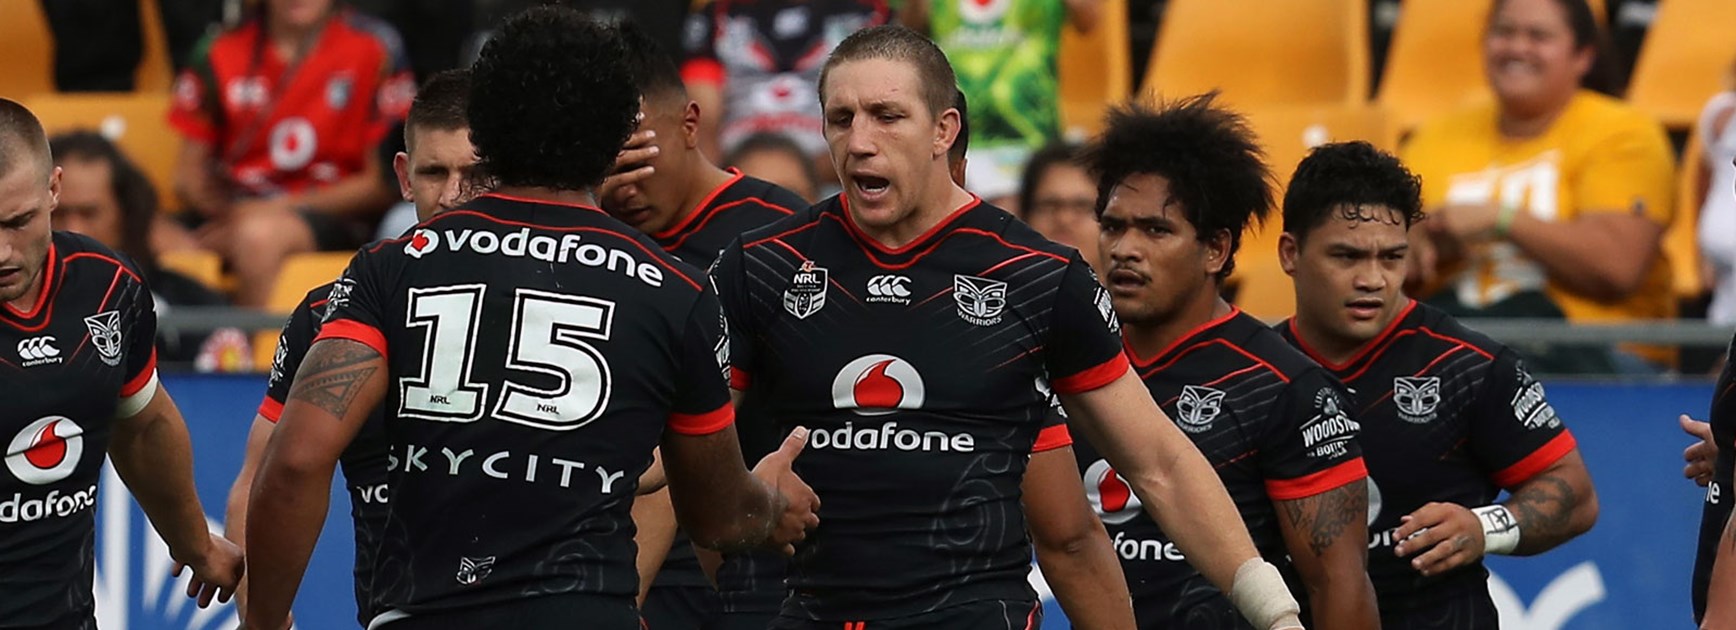 Ryan Hoffman scored the match-winner as the Warriors downed the Titans.